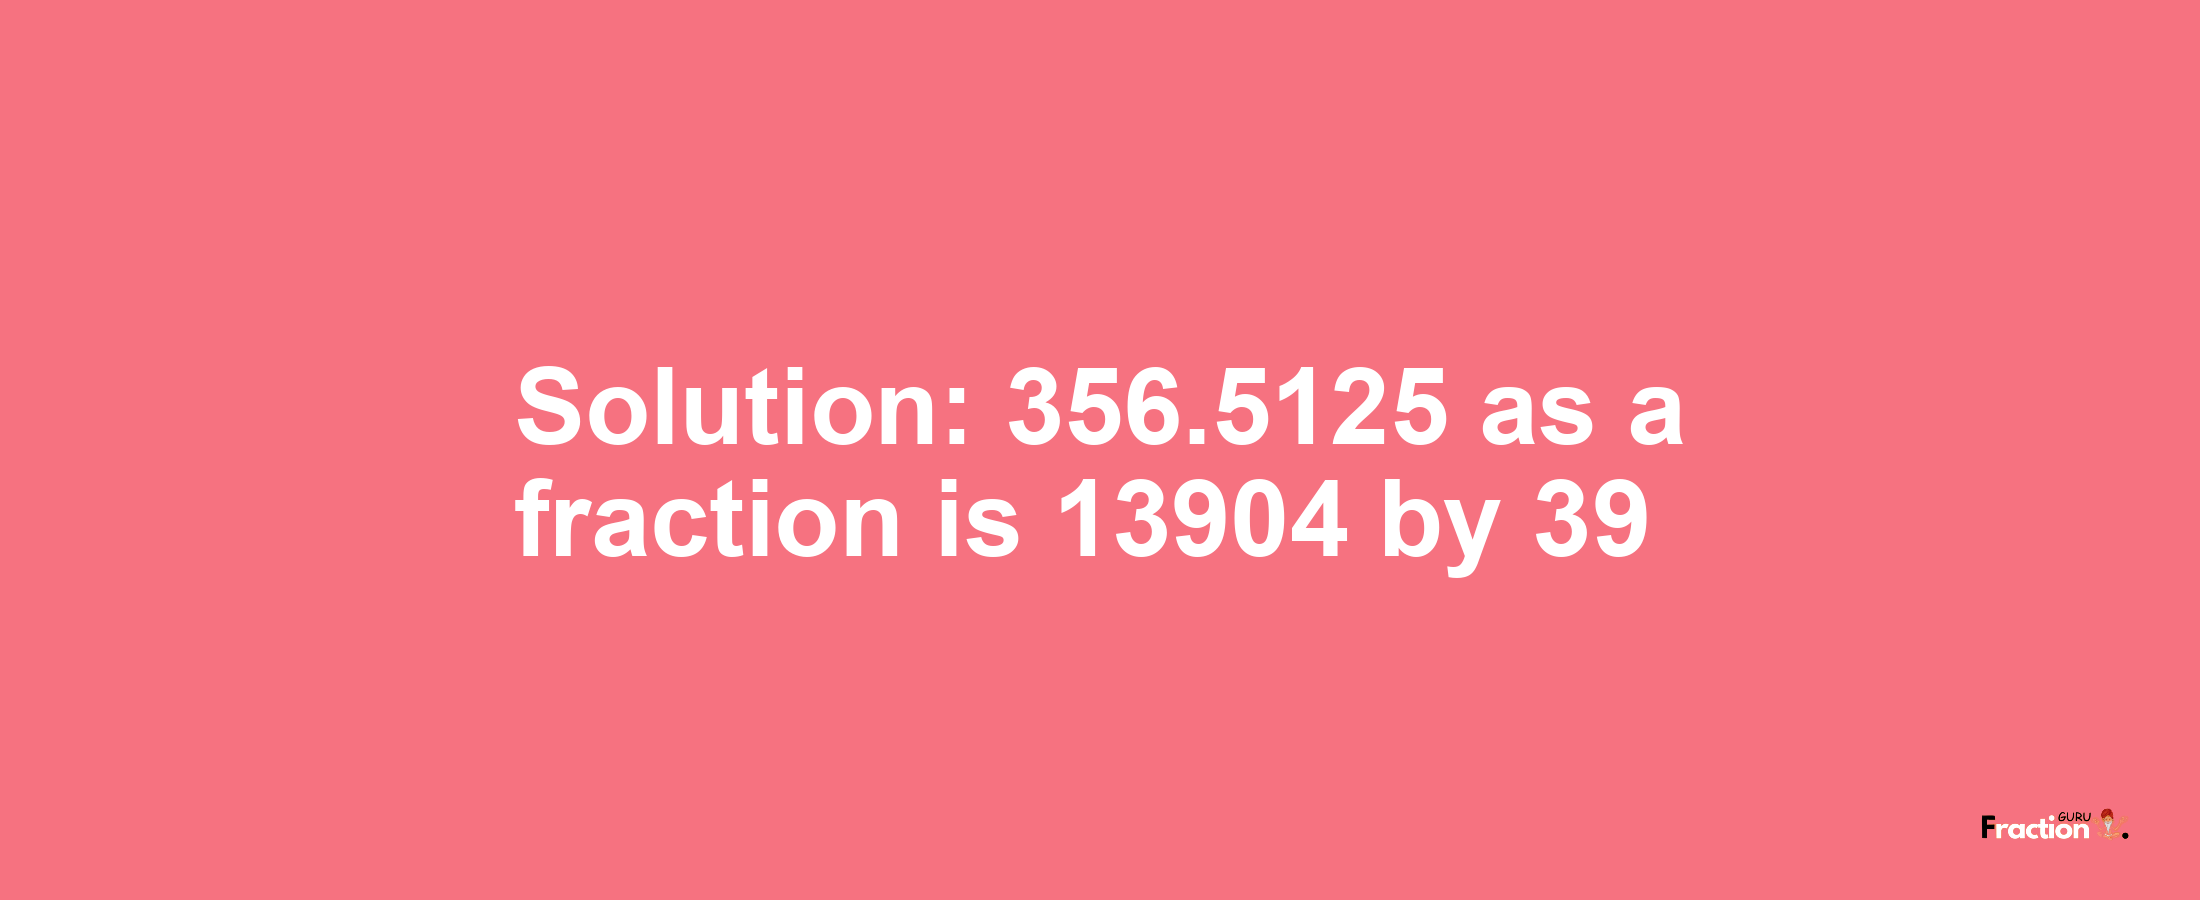 Solution:356.5125 as a fraction is 13904/39